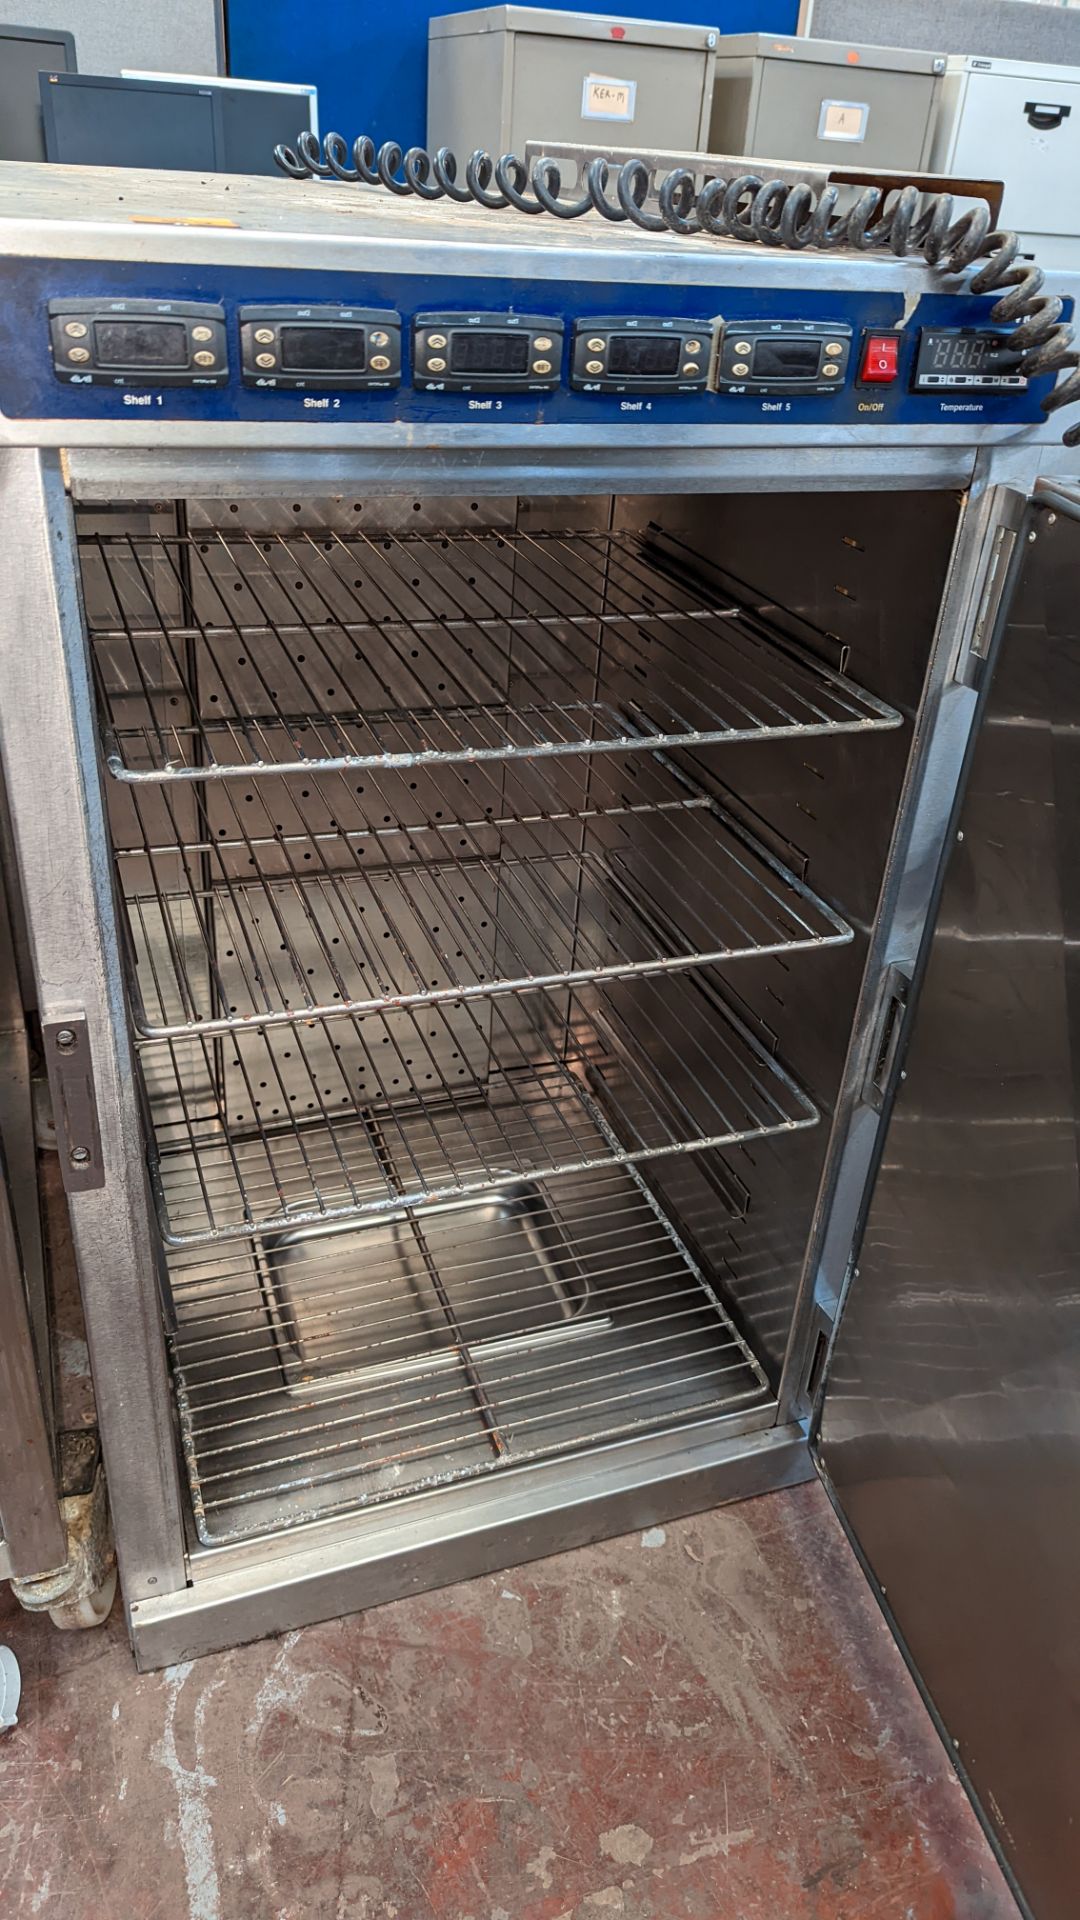 Victor stainless steel warming cupboard - Image 4 of 7